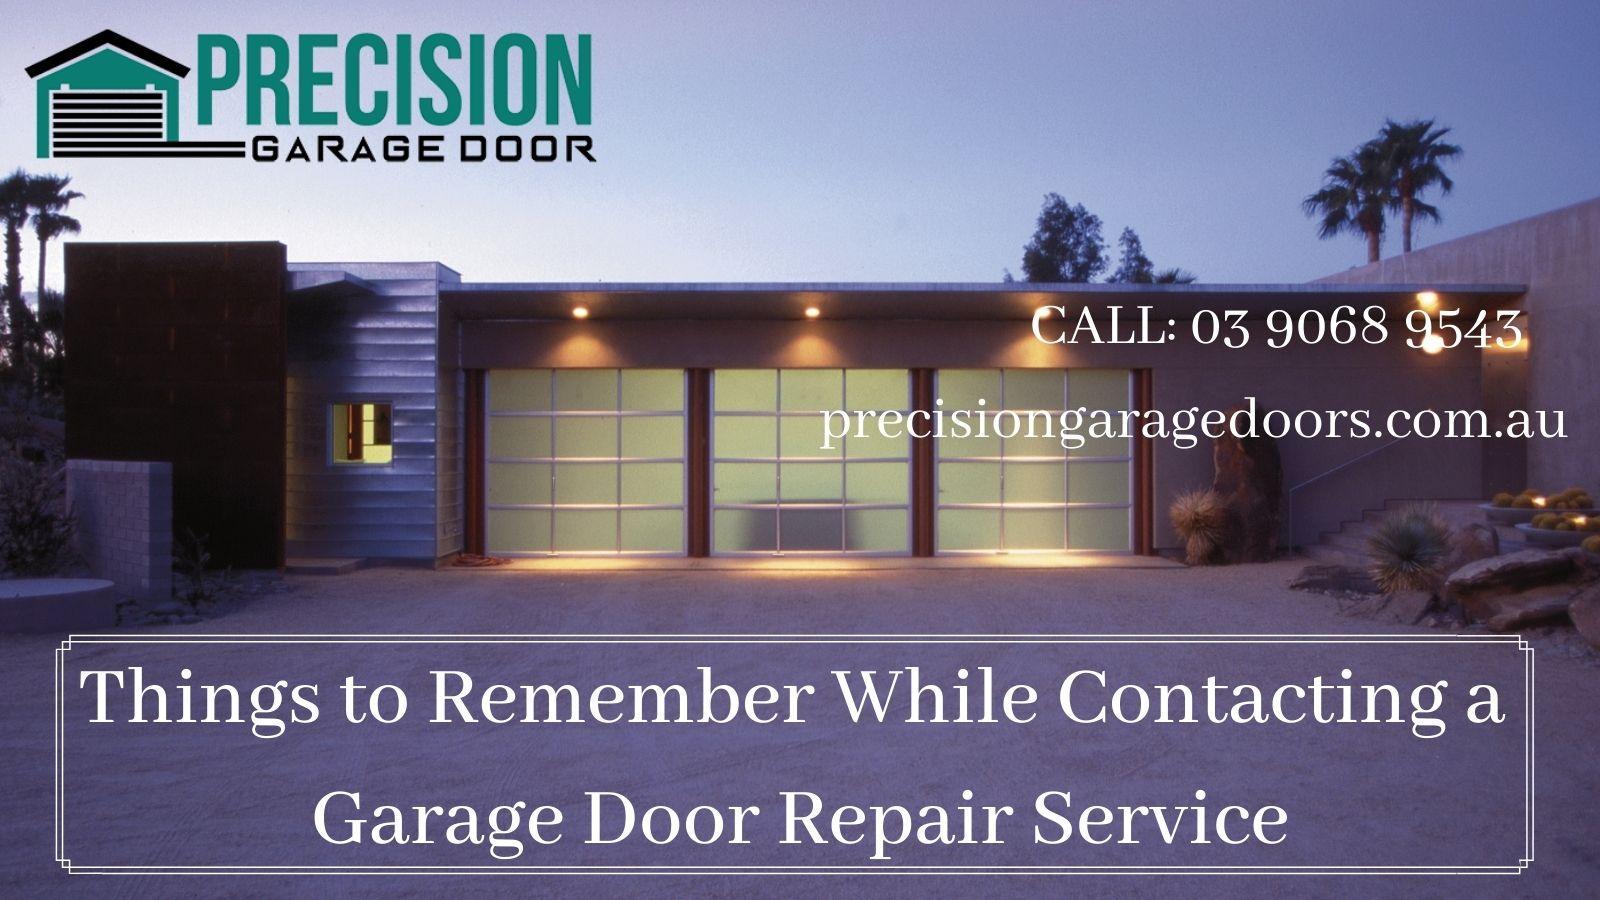 Things to Remember While Contacting a Garage Door Repair Service